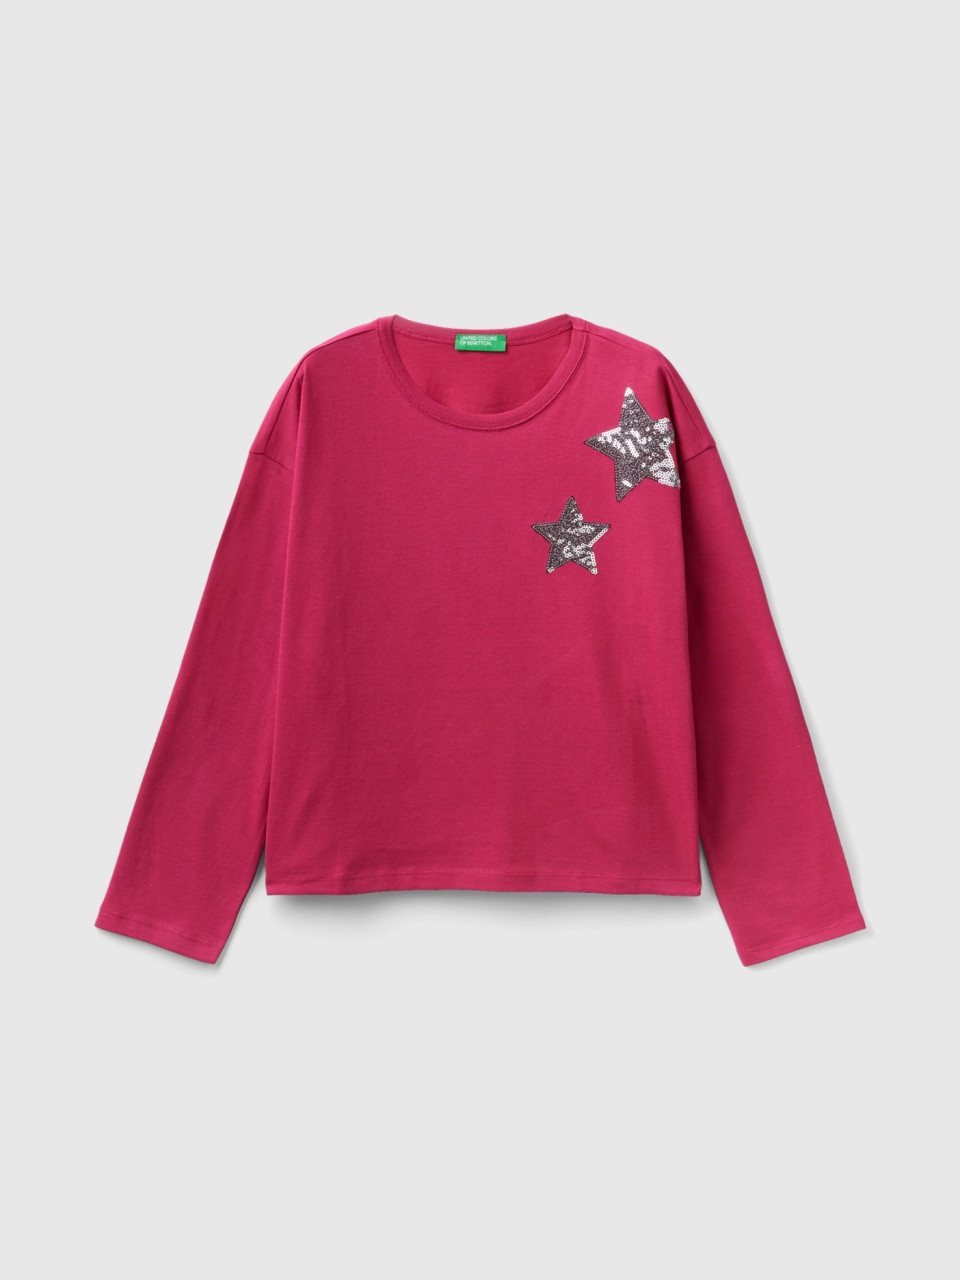 Benetton, T-shirt With Print And Sequins, Cyclamen, Kids